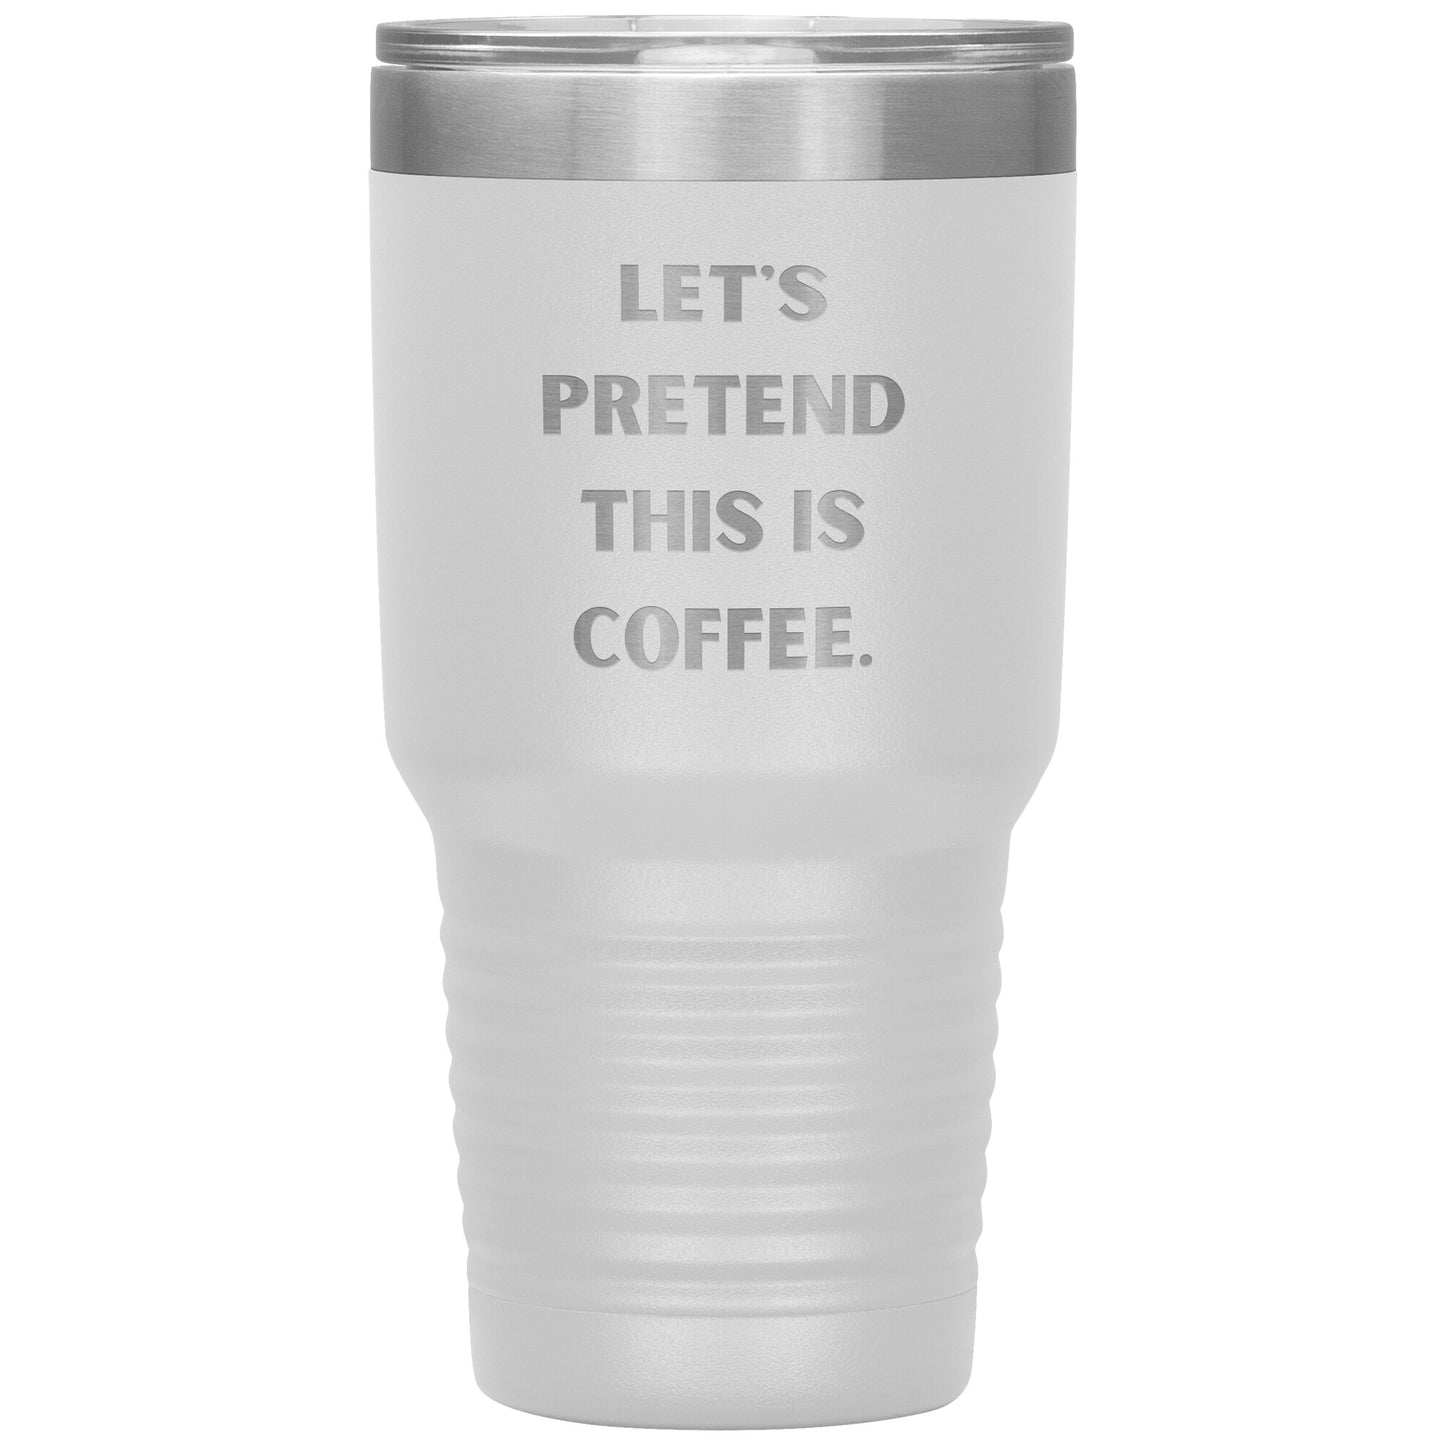 "Let's Pretend This is Coffee" Durable, Insulated 30 oz. Tumbler